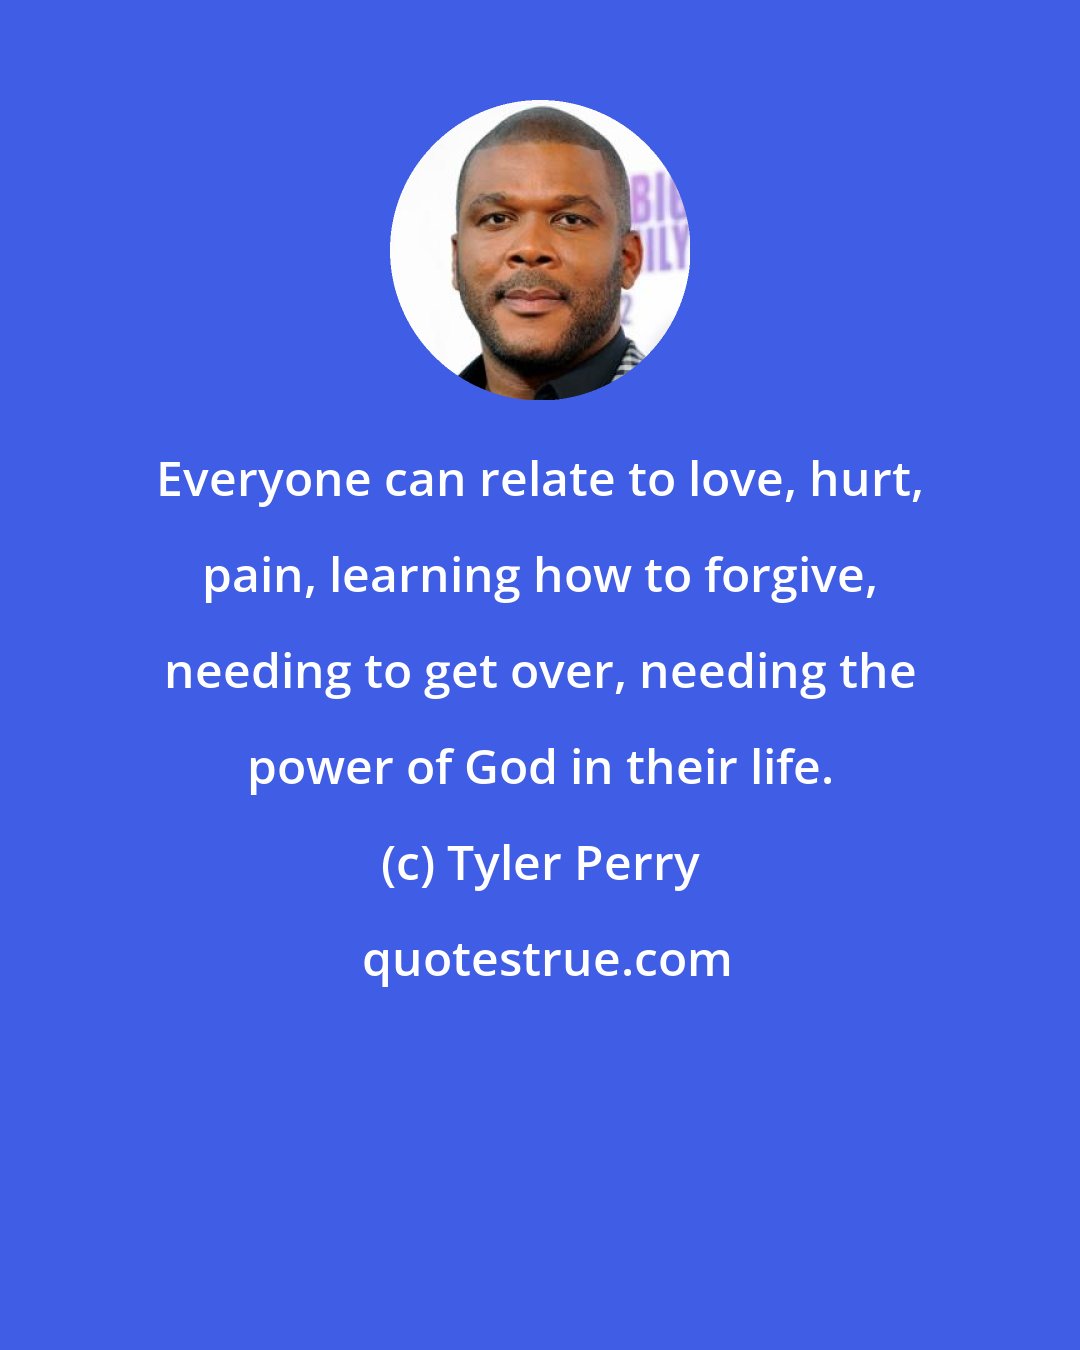 Tyler Perry: Everyone can relate to love, hurt, pain, learning how to forgive, needing to get over, needing the power of God in their life.